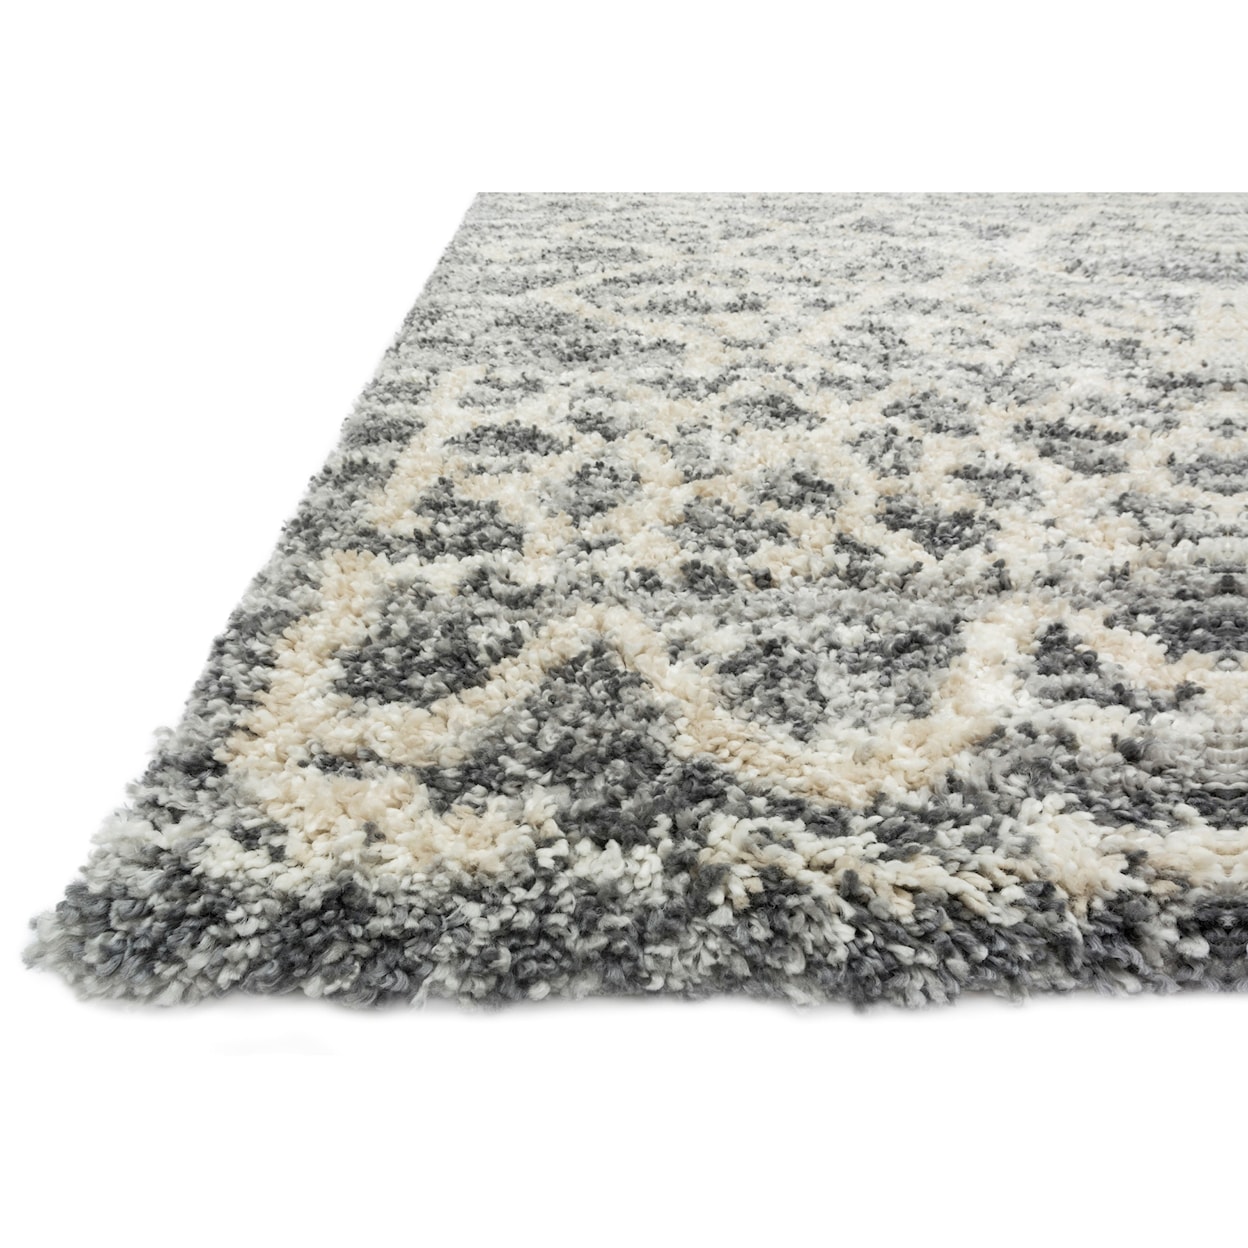 Loloi Rugs Quincy 5'3" x 7'6" Graphite / Beige Rug